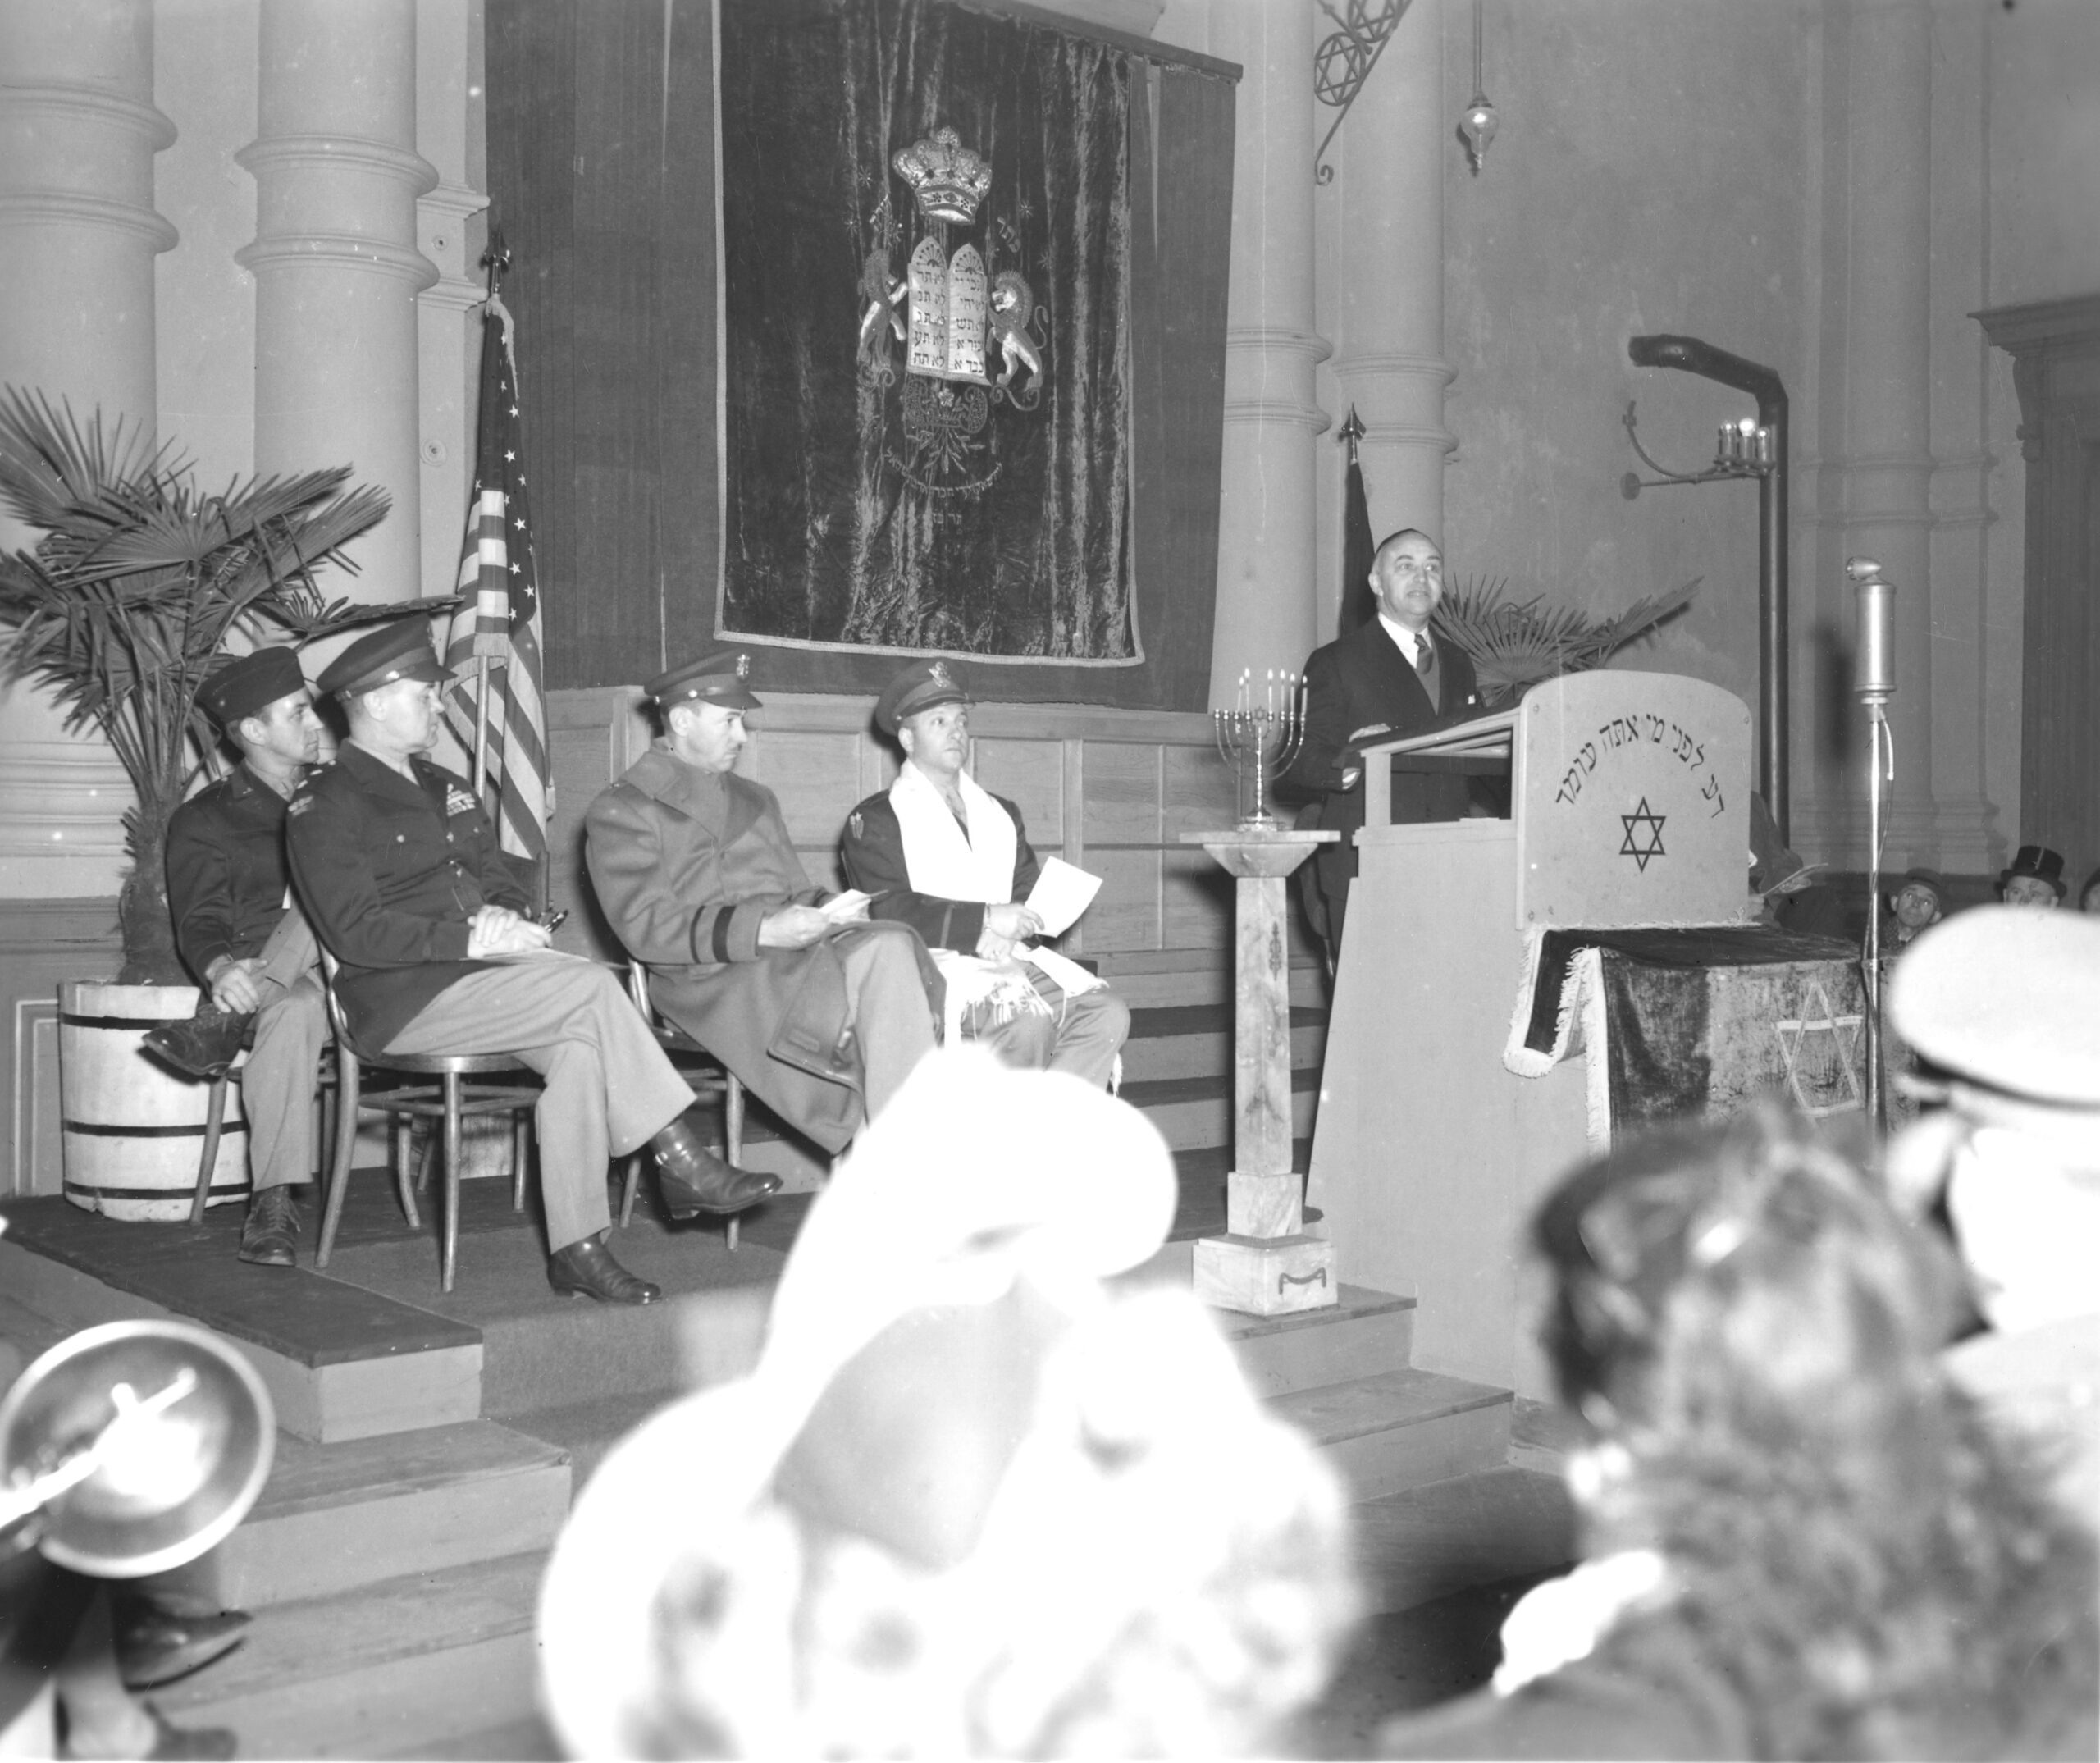 Photograph of the ceremonial rededication of the synagogue. HHStAW fonds 3008, 33, no. 087